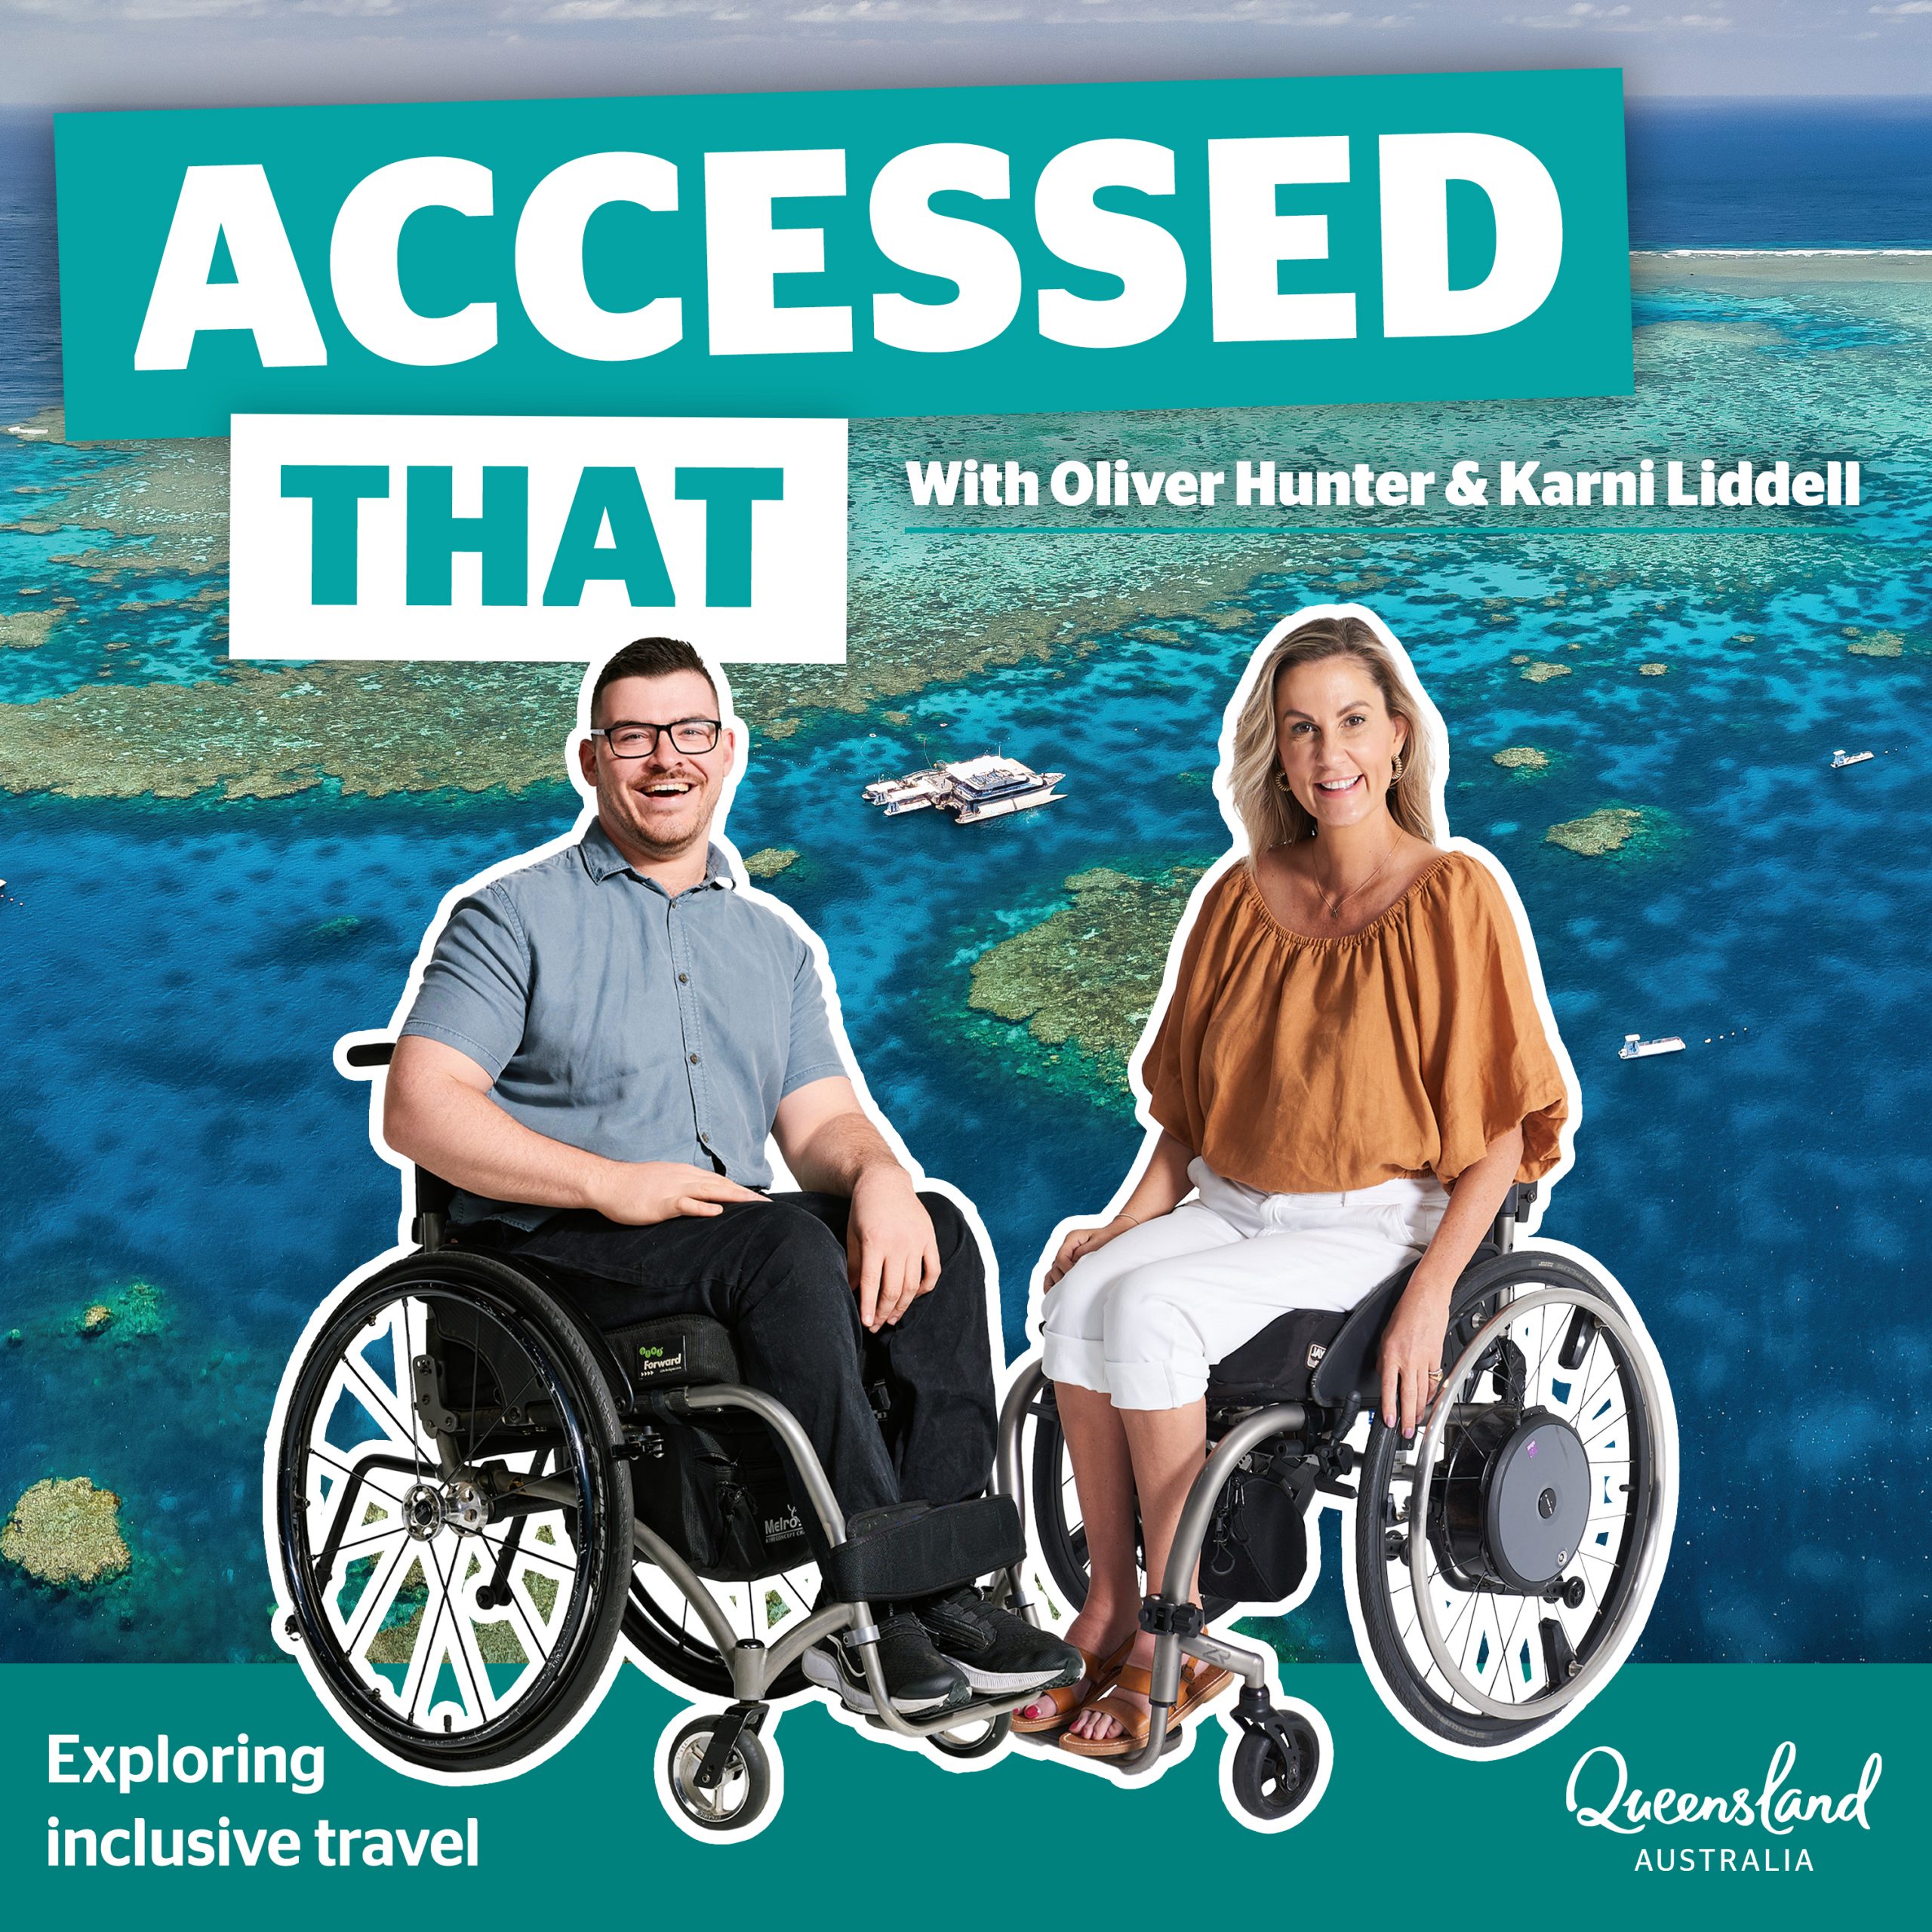 A m an and a woman seated in a wheelchair with waterway behind them.